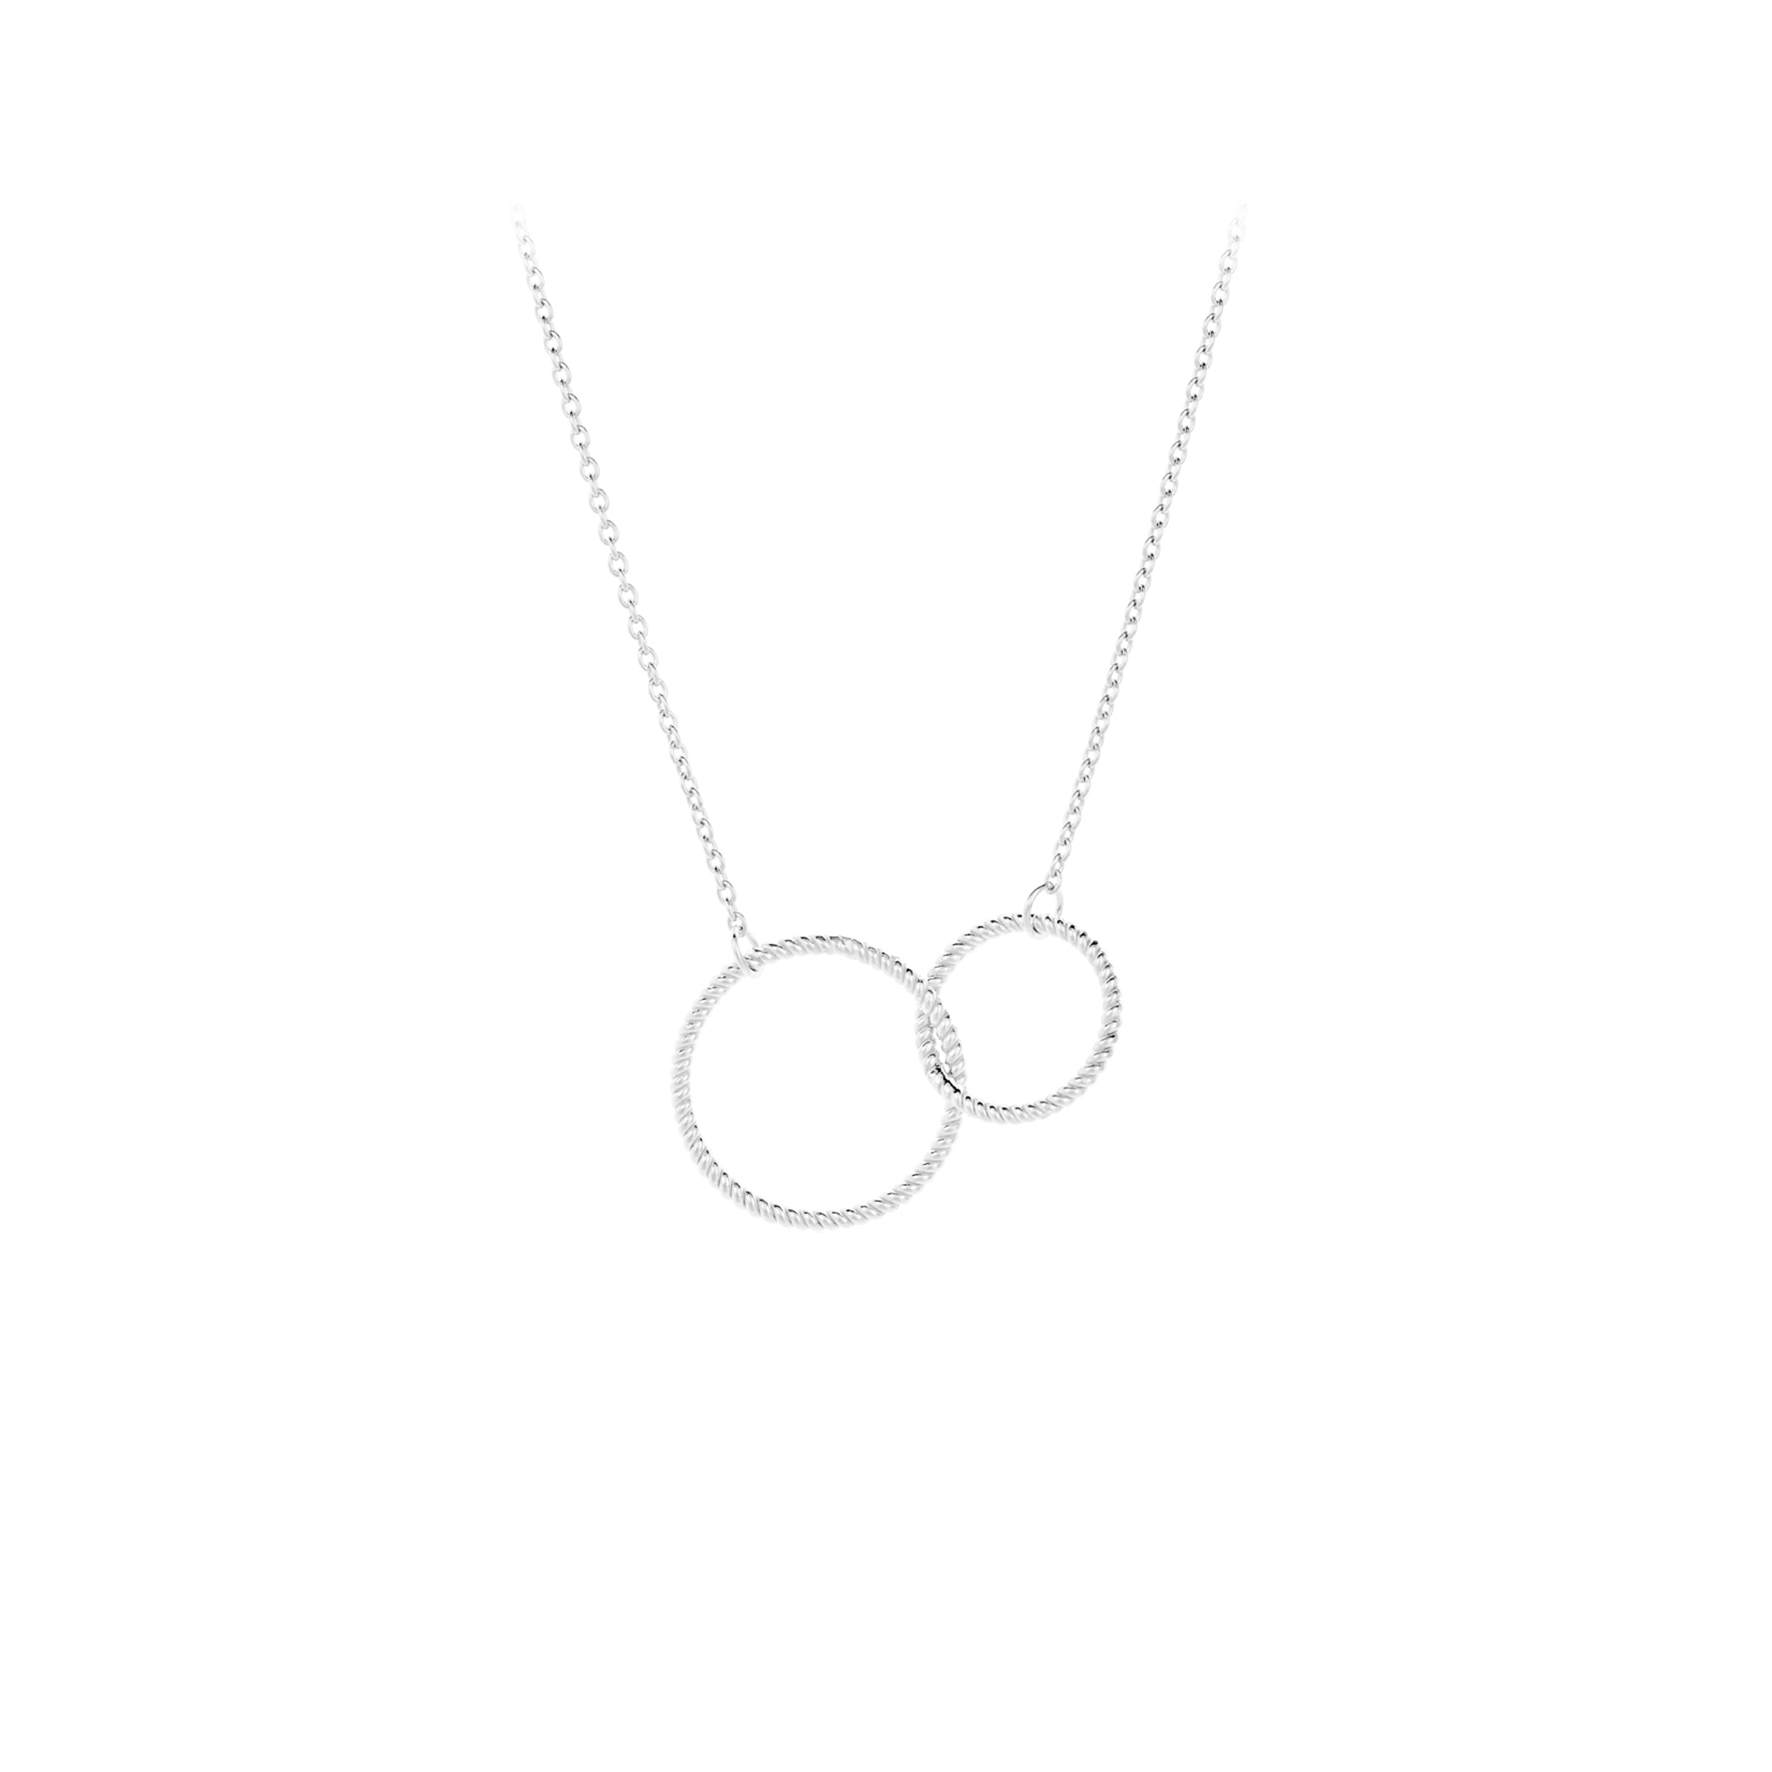 Double Twisted Necklace from Pernille Corydon in Silver Sterling 925